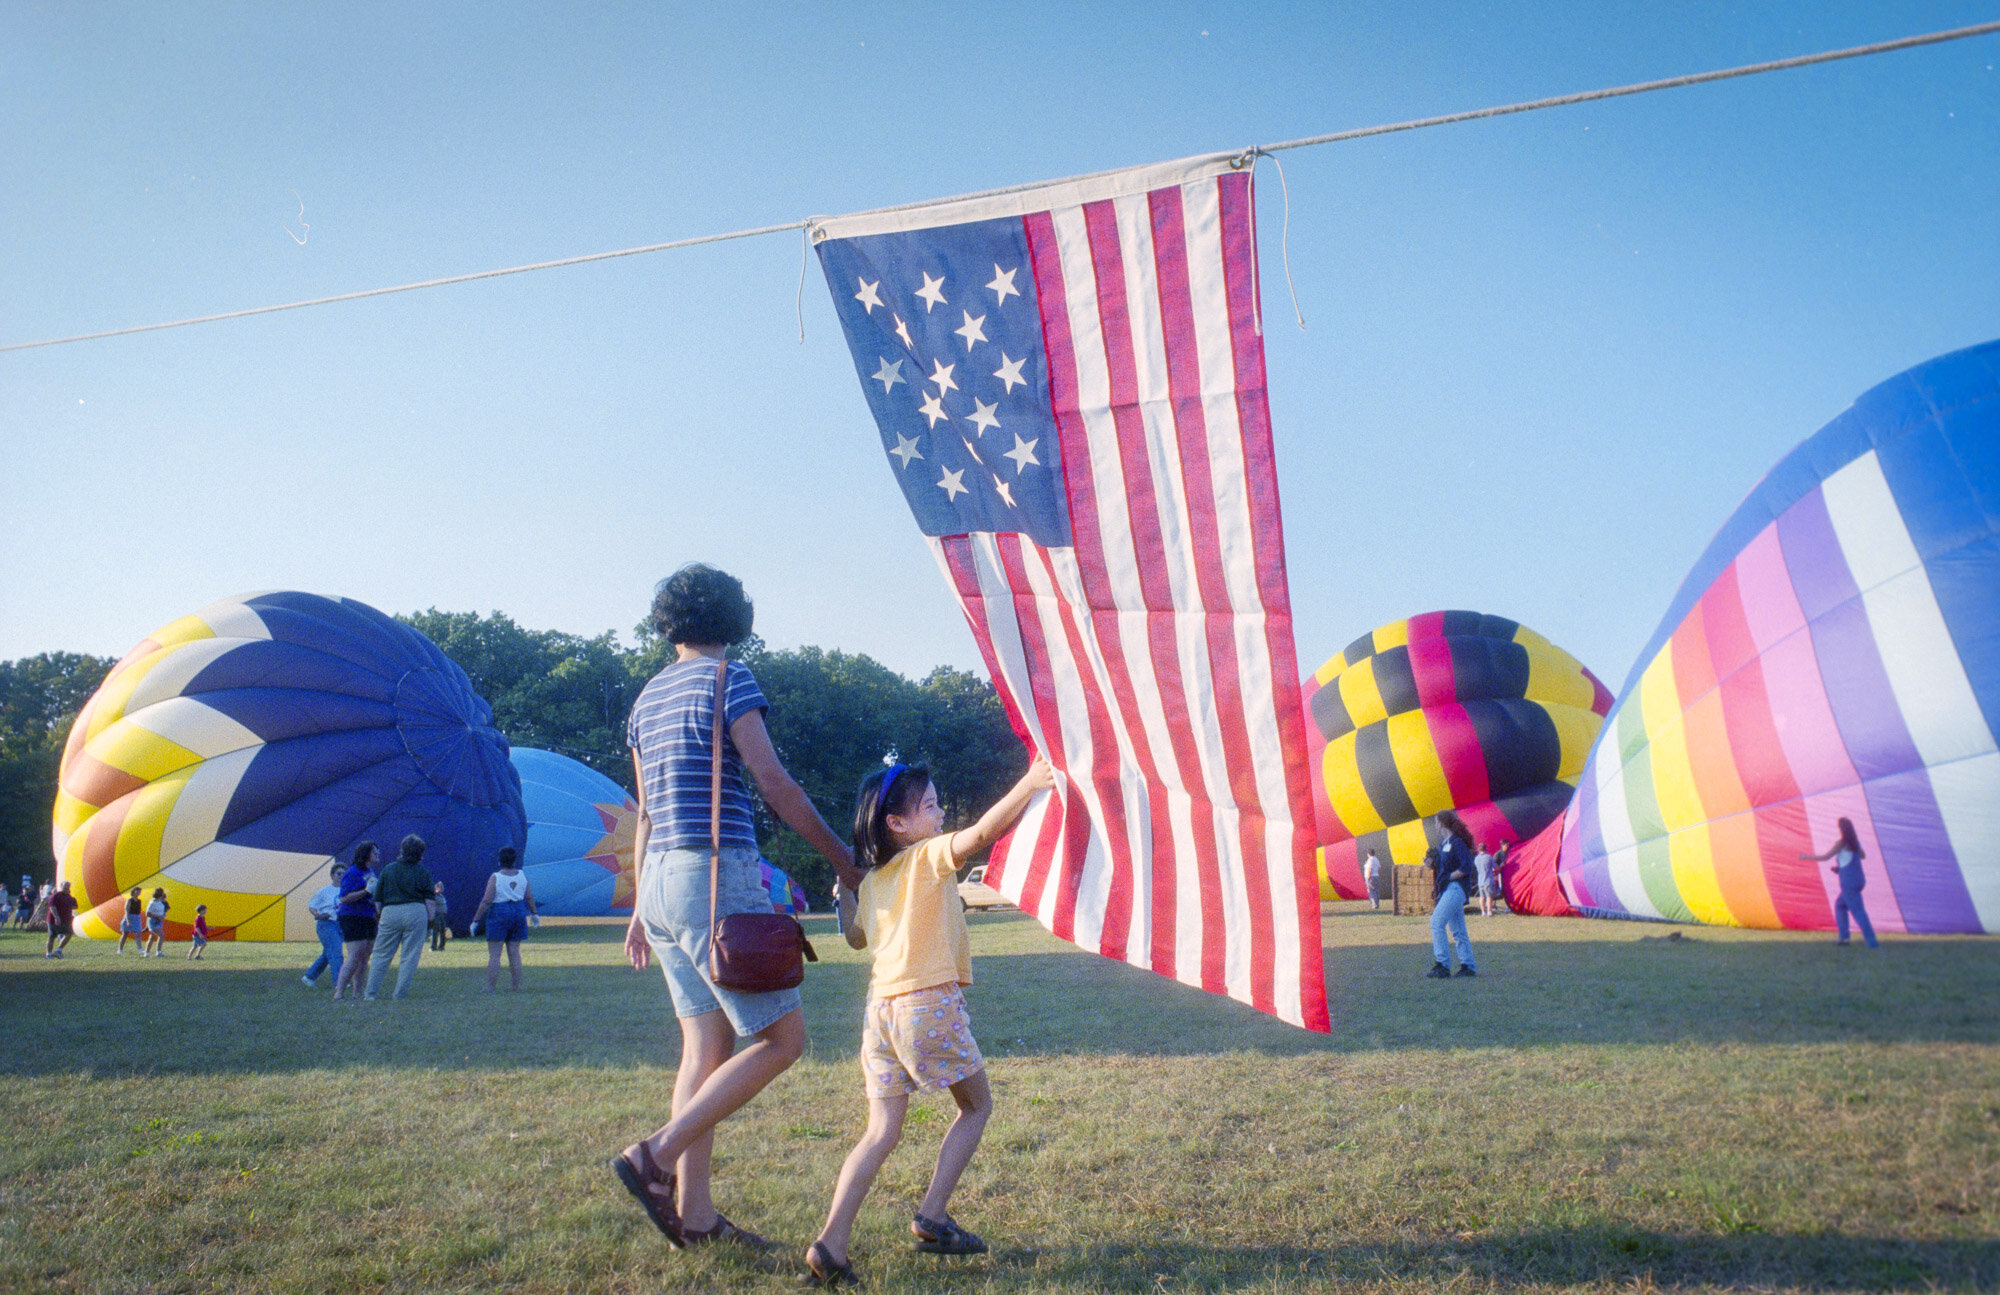 A Child and Mother at Balloon Festival